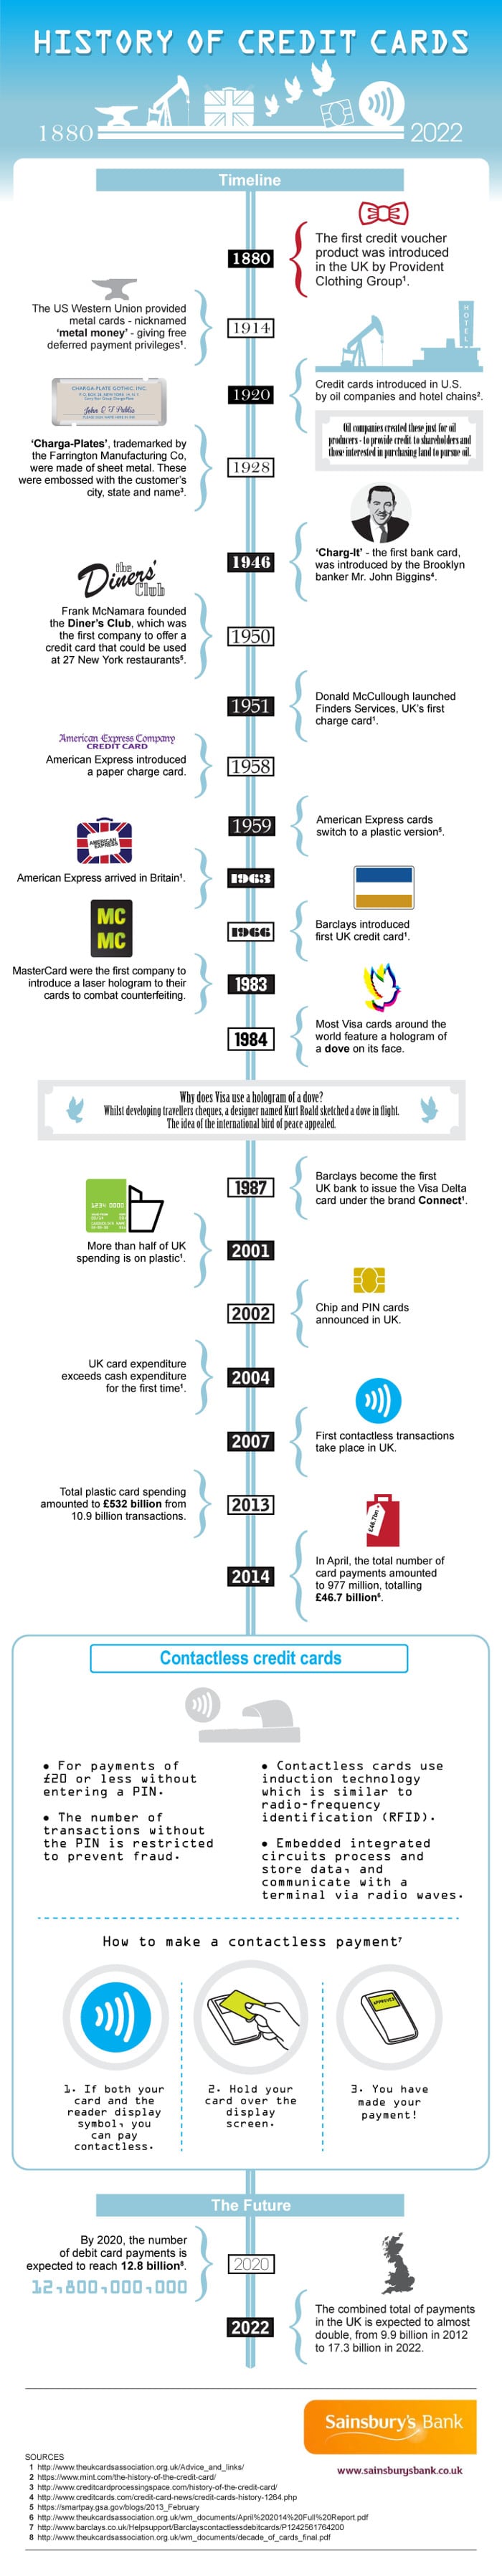 History of Credit Cards 2015